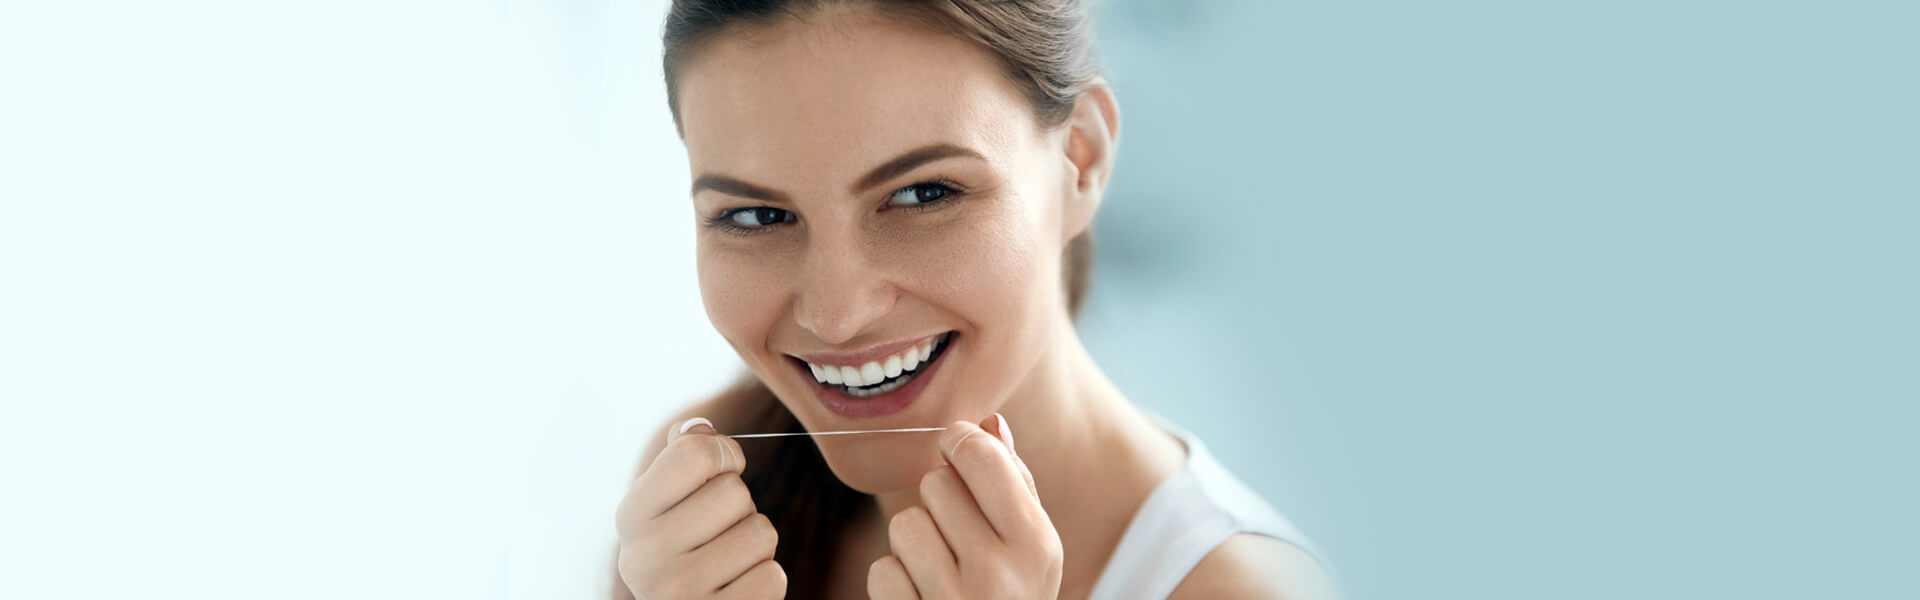 Should You Brush or Floss First?